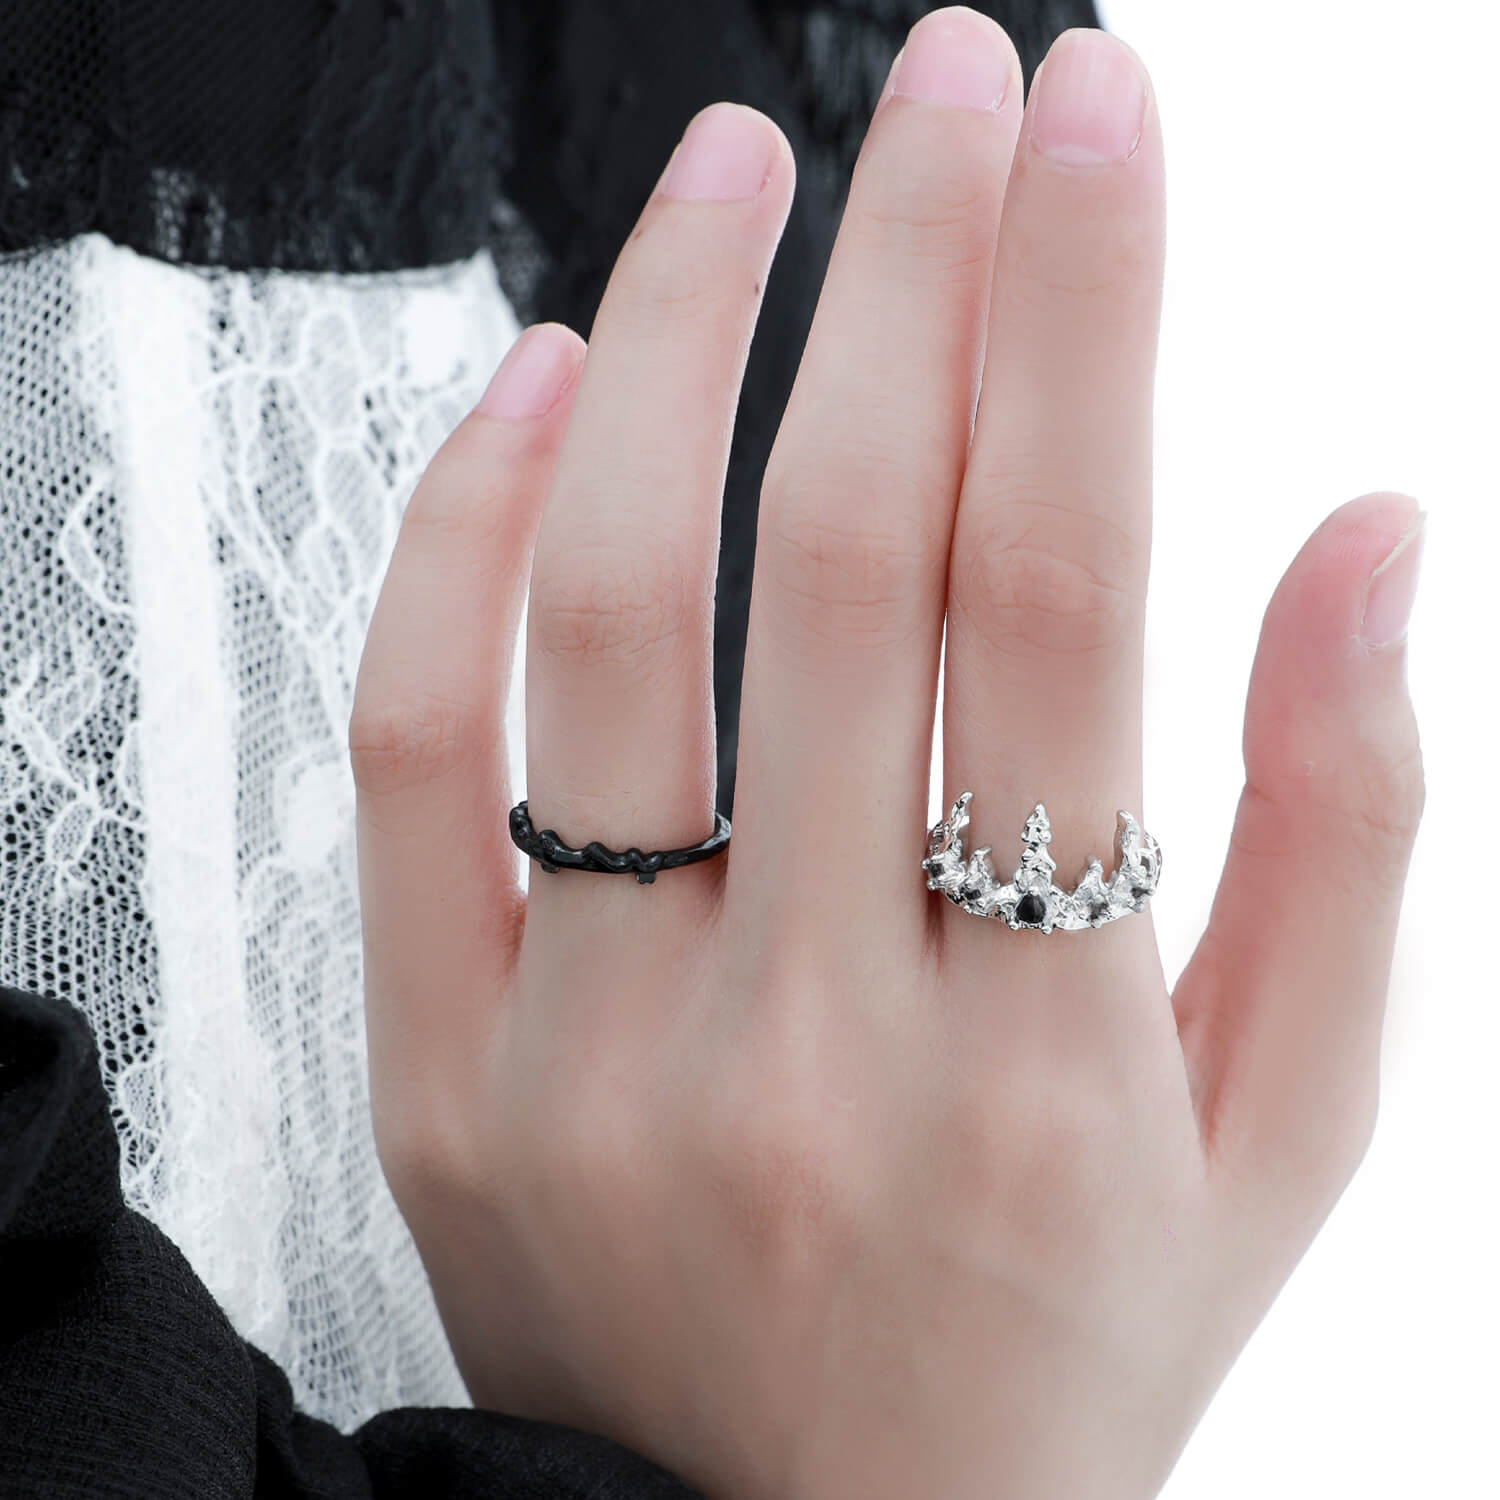 A chic crown design with a black zircon accent, offering flexible styling in silver and black. Find yours at KHANIE.COM.